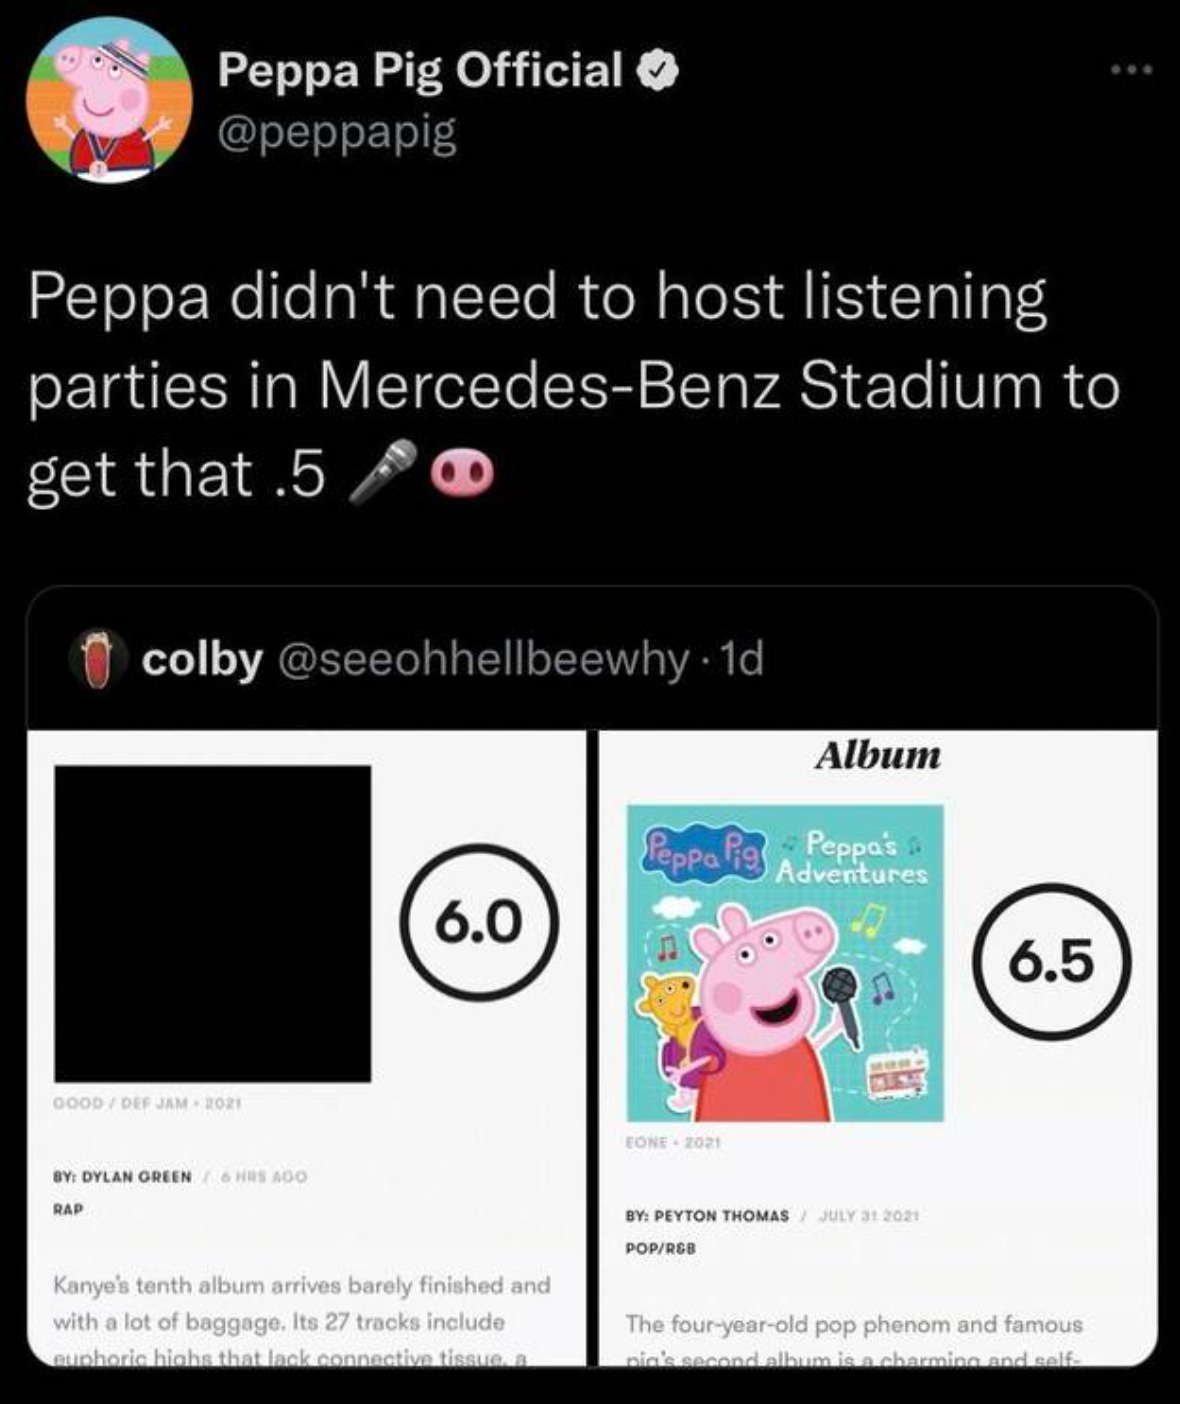 Peppa didn't need to host a listening parties in Mercedes Benz Stadium to get that .5